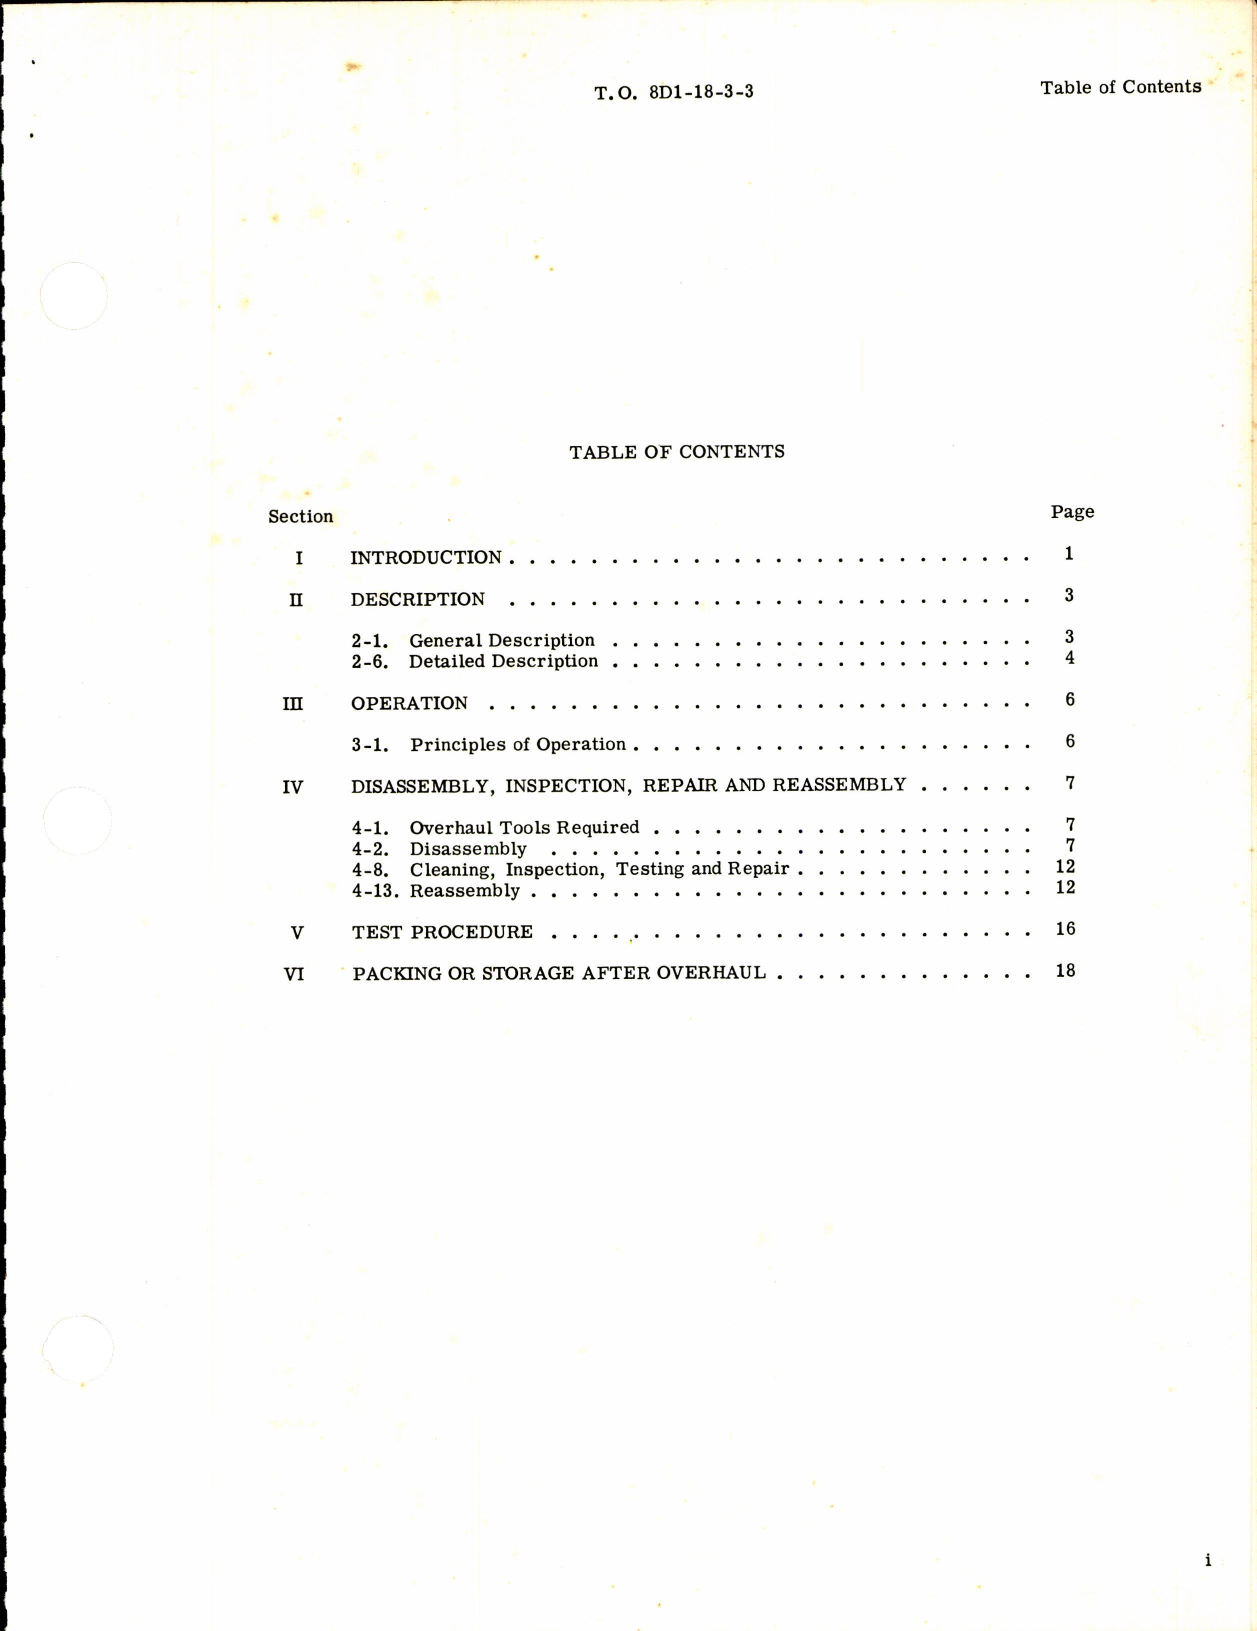 Sample page 3 from AirCorps Library document: Handbook of Overhaul Instructions for Electric Windshield Wipers